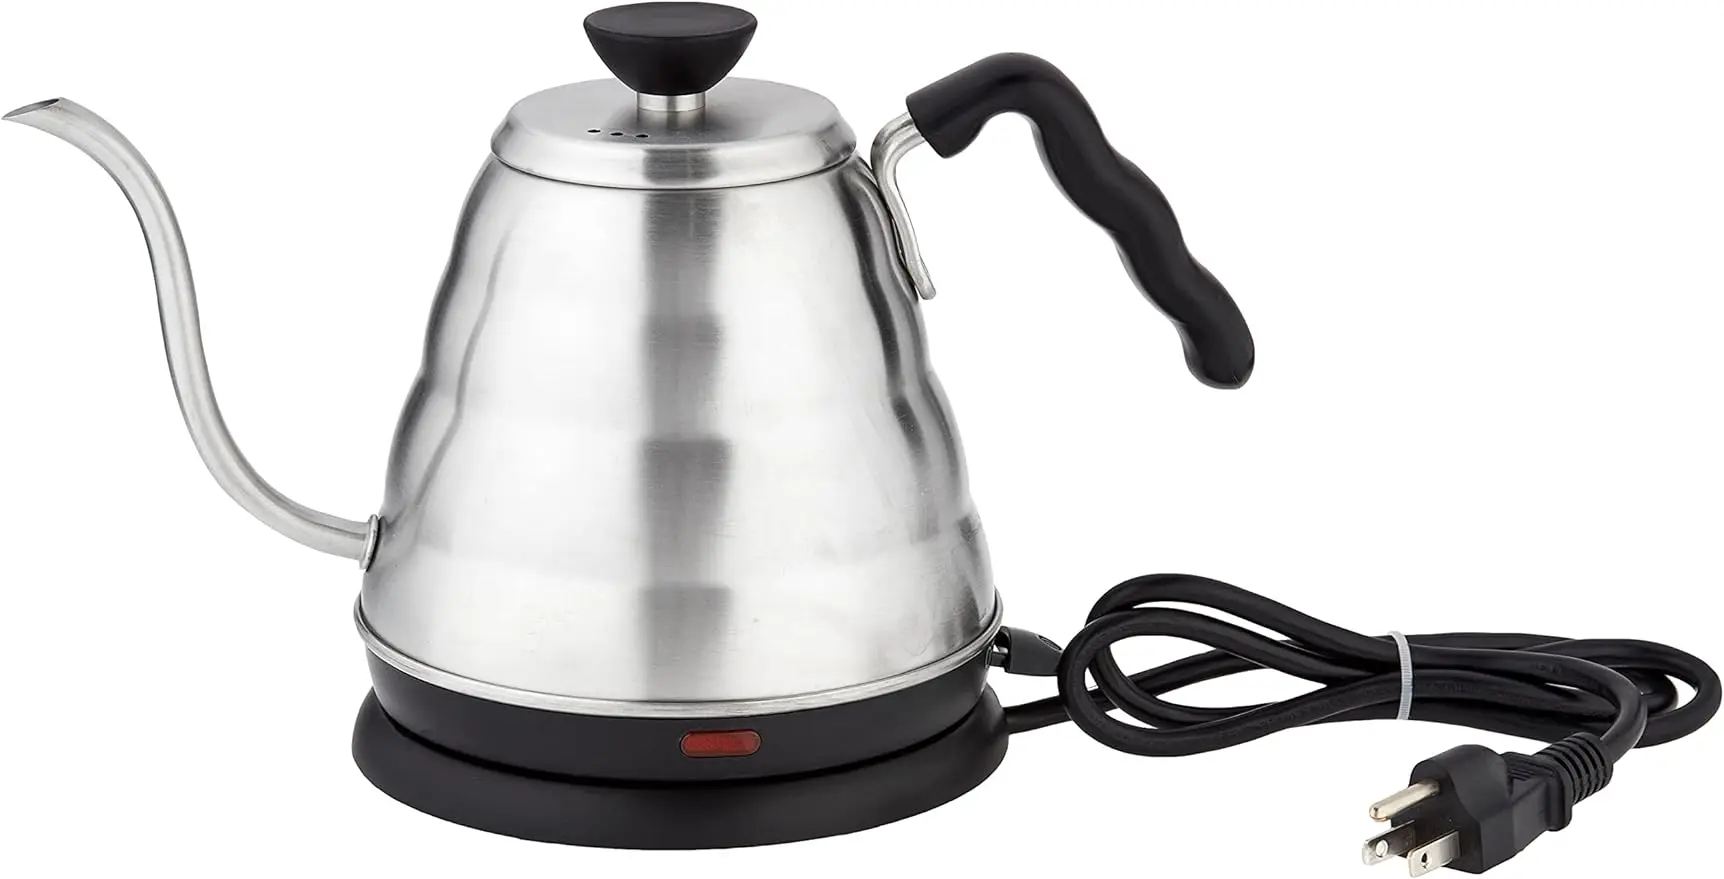 

Hario V60 "Buono" Drip Kettle Electric Gooseneck Coffee Kettle 800 mL, Stainless Steel, Silver